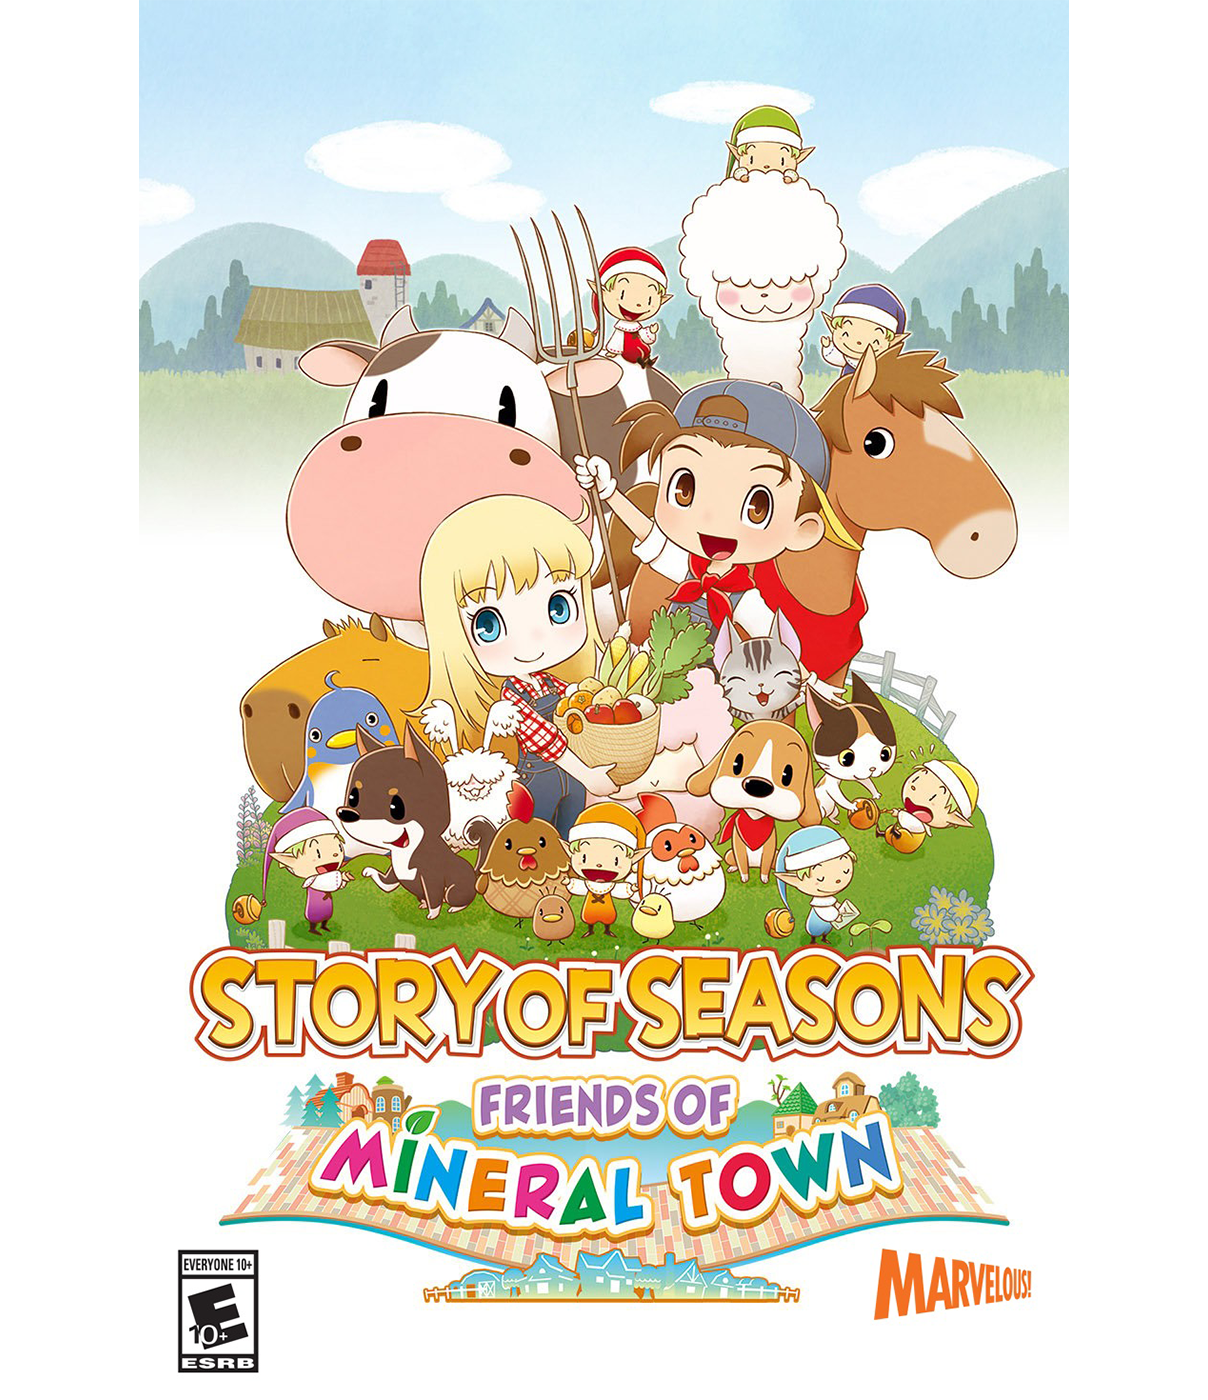 STORY OF SEASONS: Friends of Mineral Town | XSEED Games